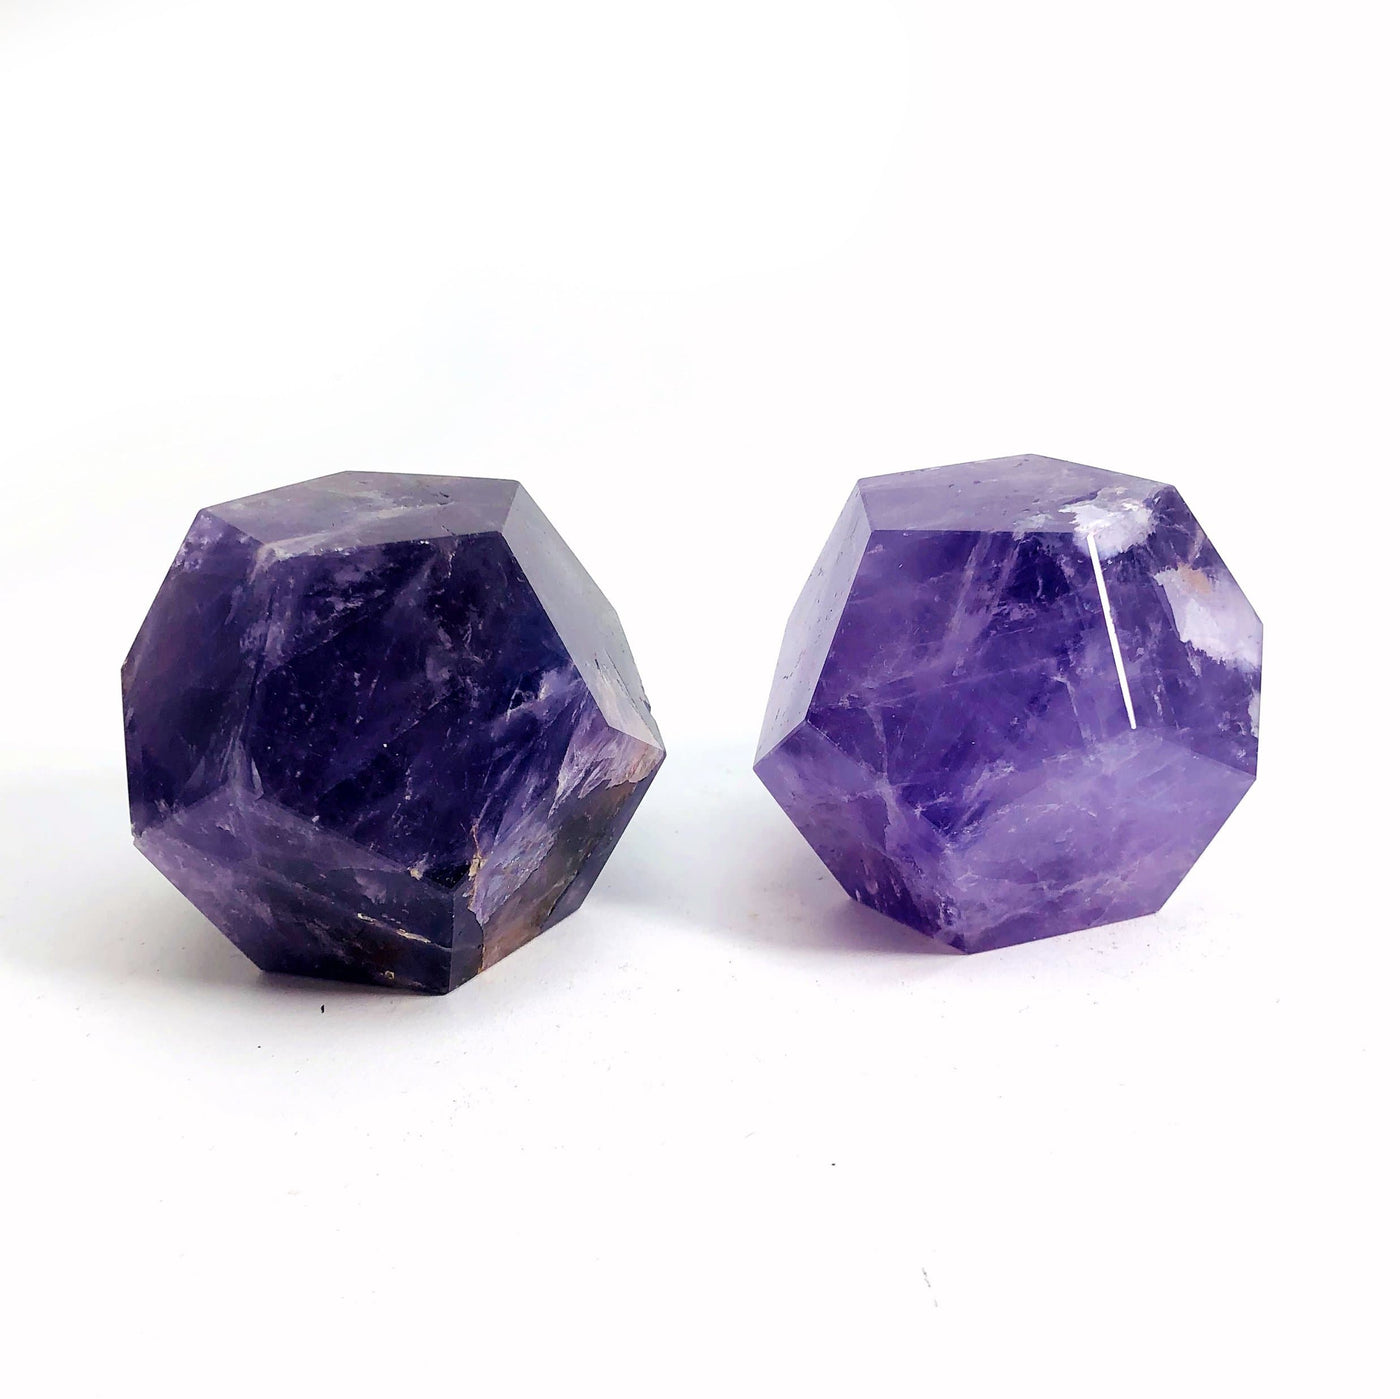 2 Amethyst Dodecahedrons on white background